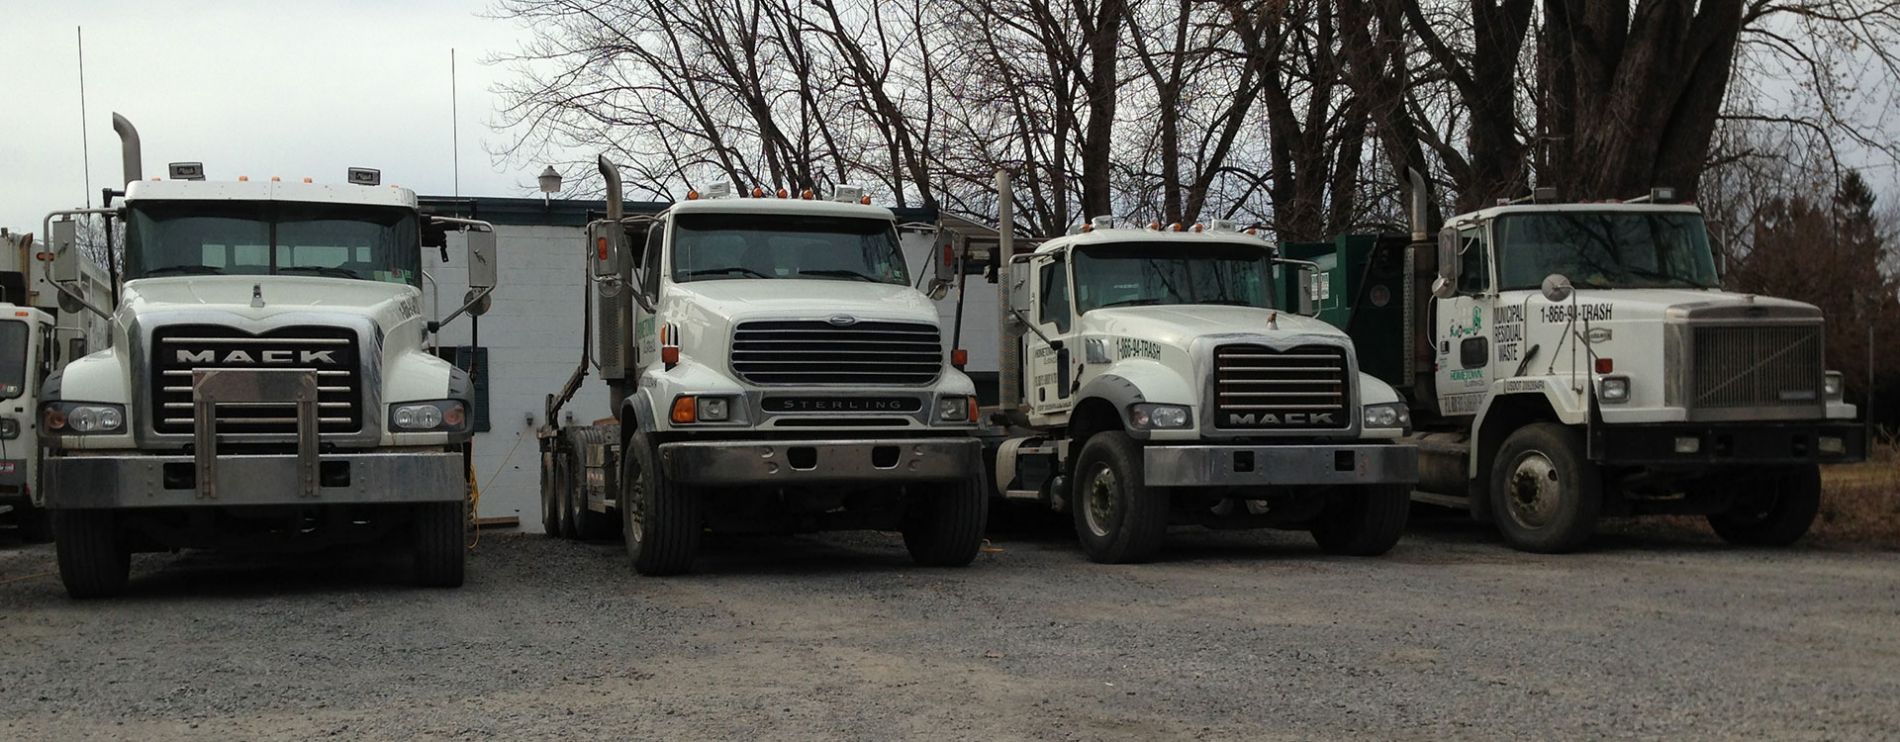 Parks Garbage Service Roll Off Trucks.